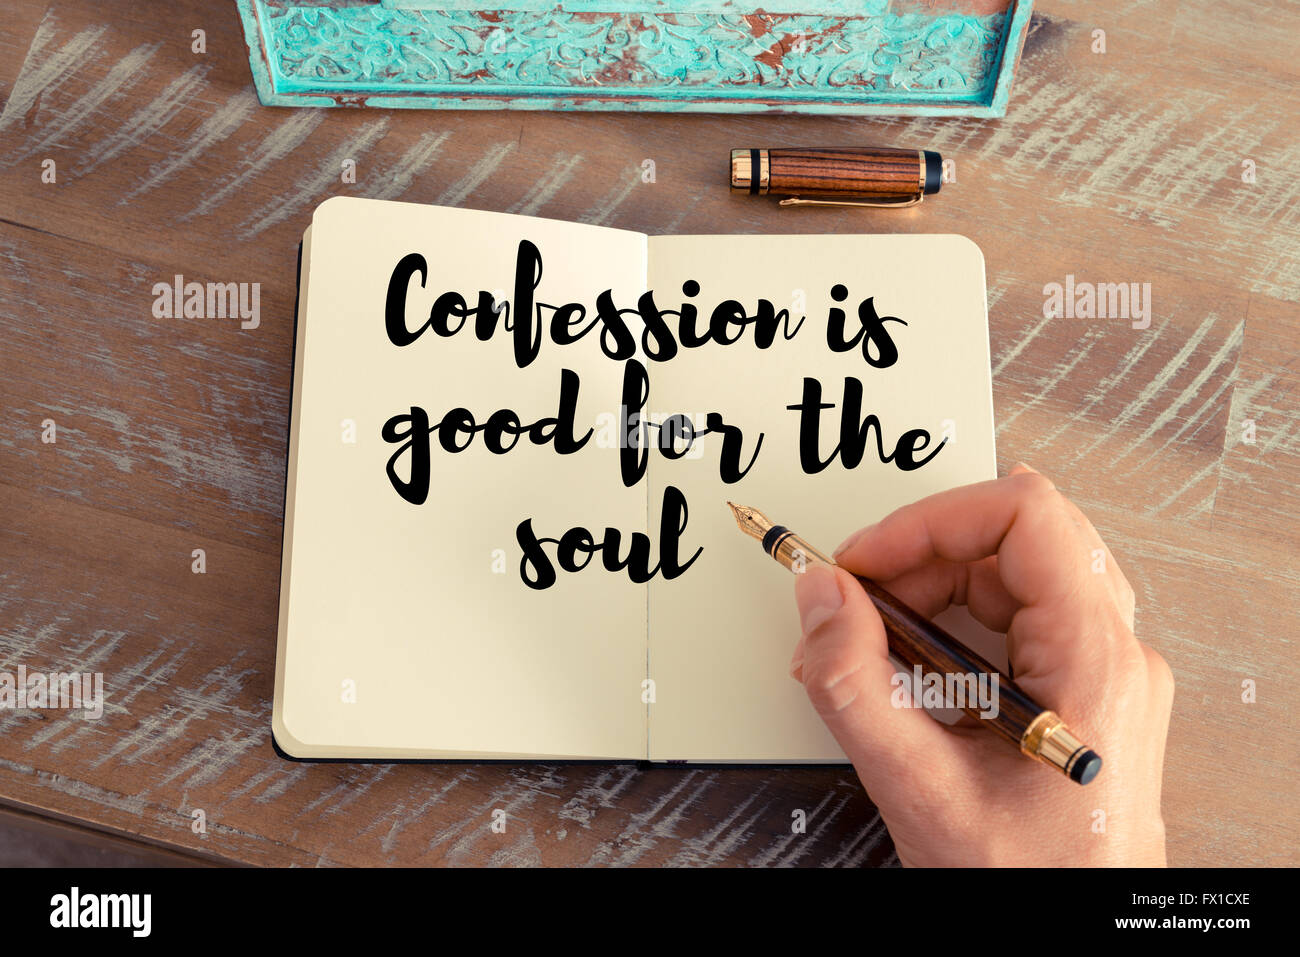 Retro effect and toned image of a woman hand writing on a notebook. Handwritten quote Confession is good for the soul as inspirational concept image Stock Photo